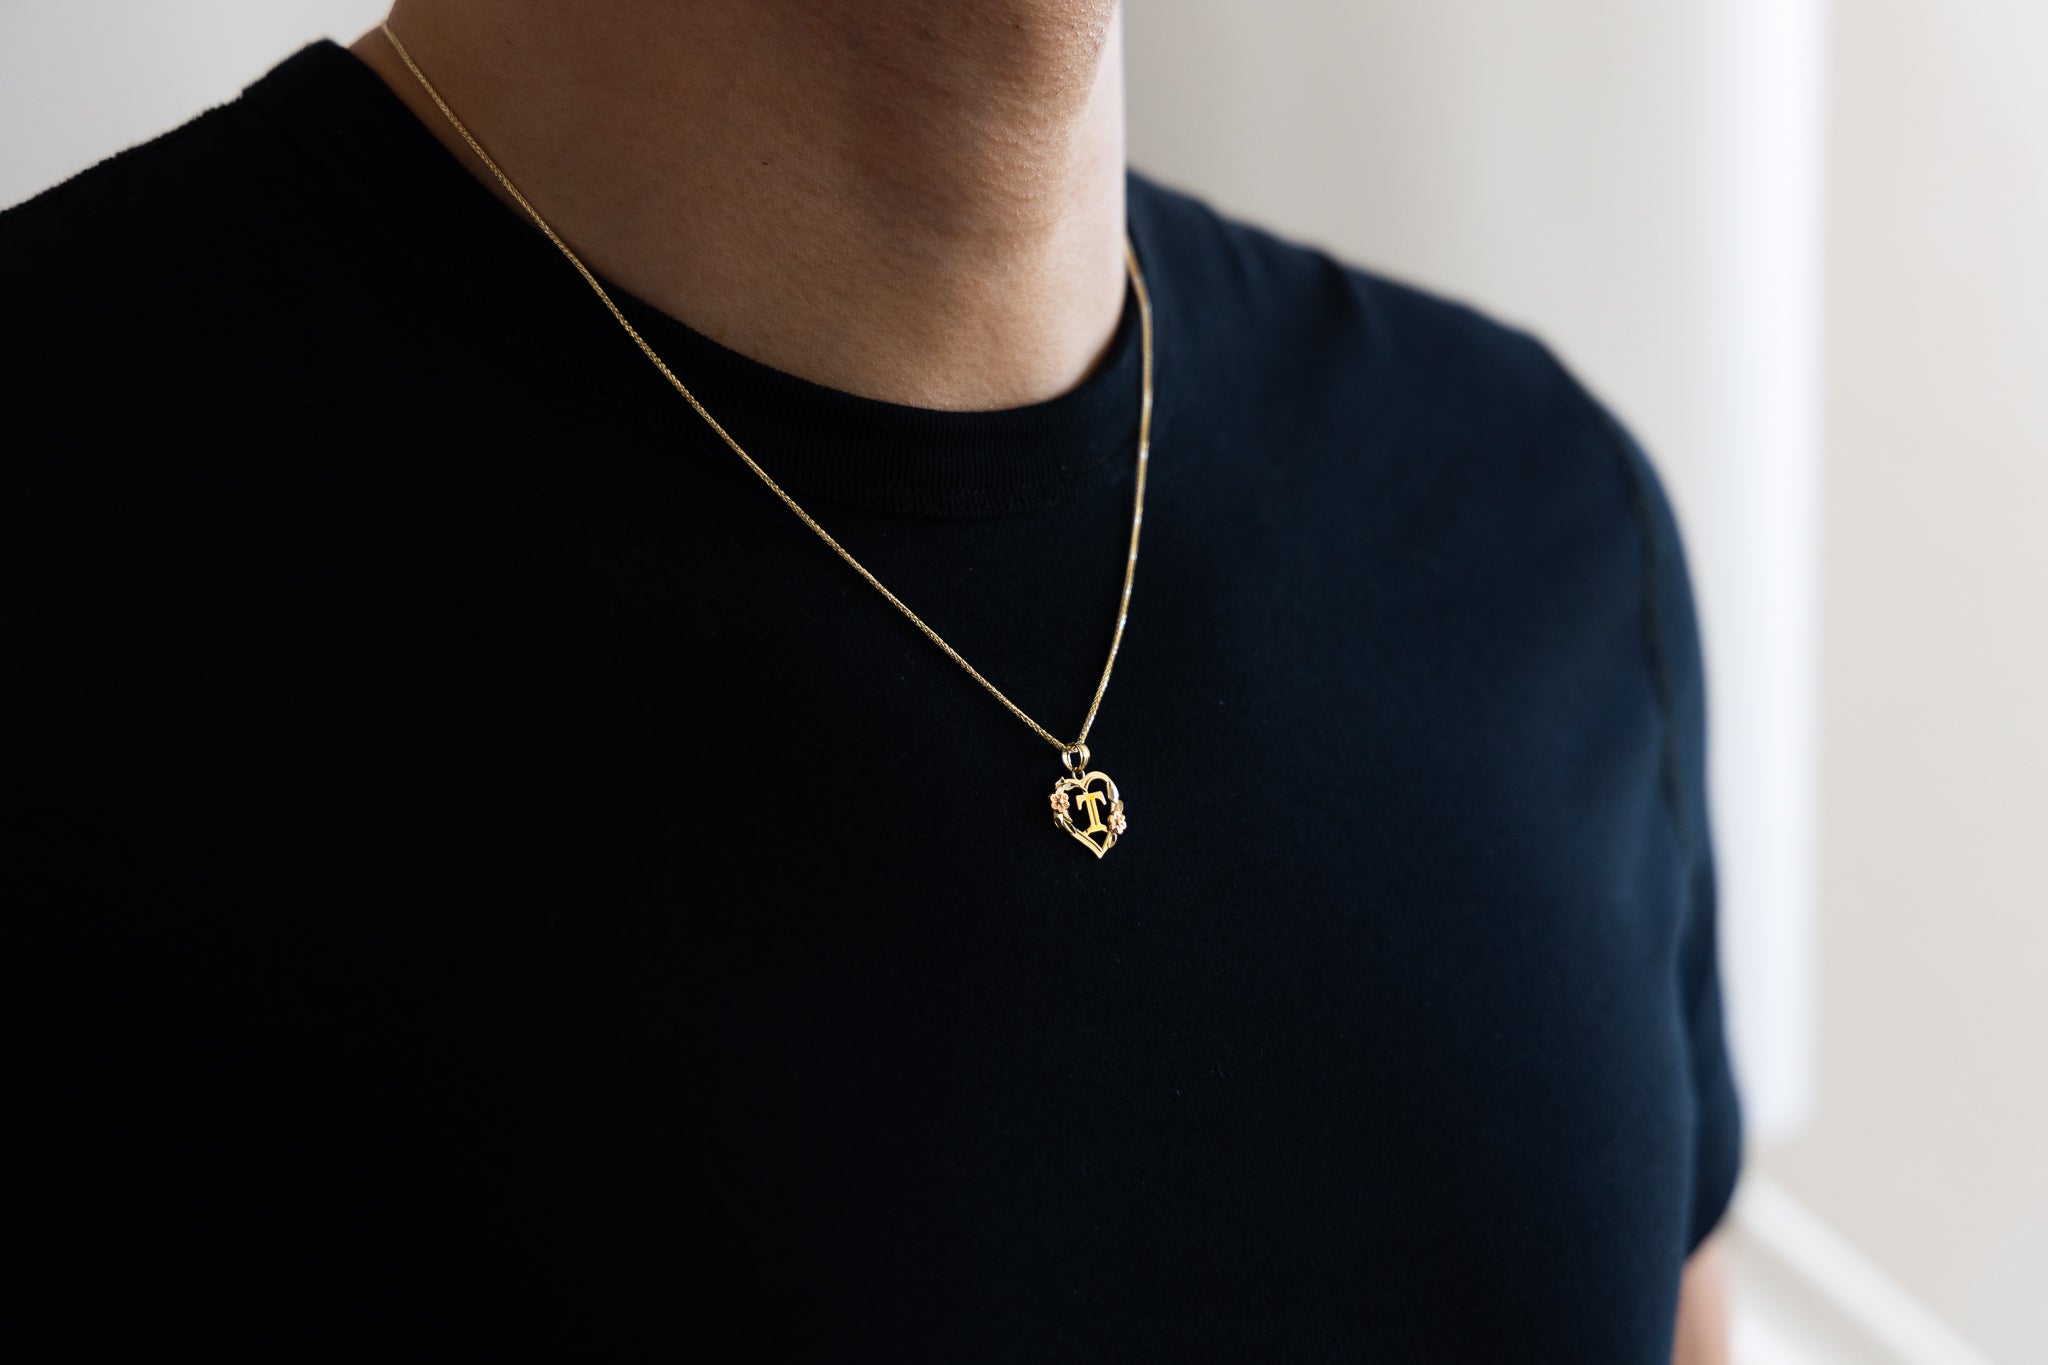 Gold Heart Initial T Pendant | A-Z Pendants - Charlie & Co. Jewelry